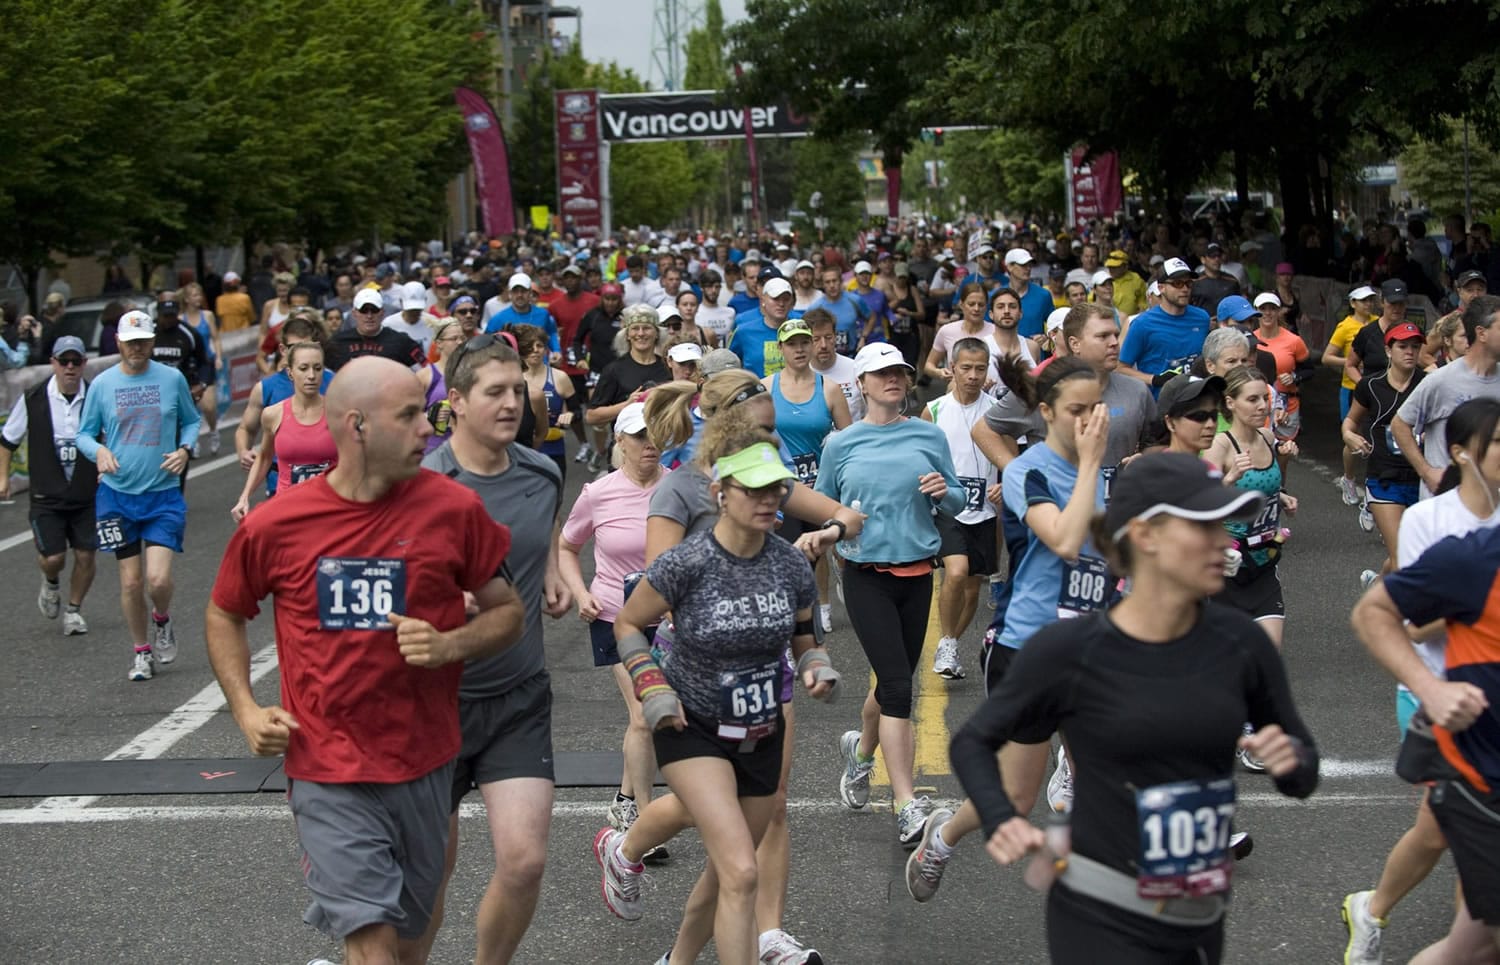 The inaugural Vancouver USA Marathon gets under way Sunday morning on Columbia Street adjacent to Esther Short Park in downtown Vancouver.